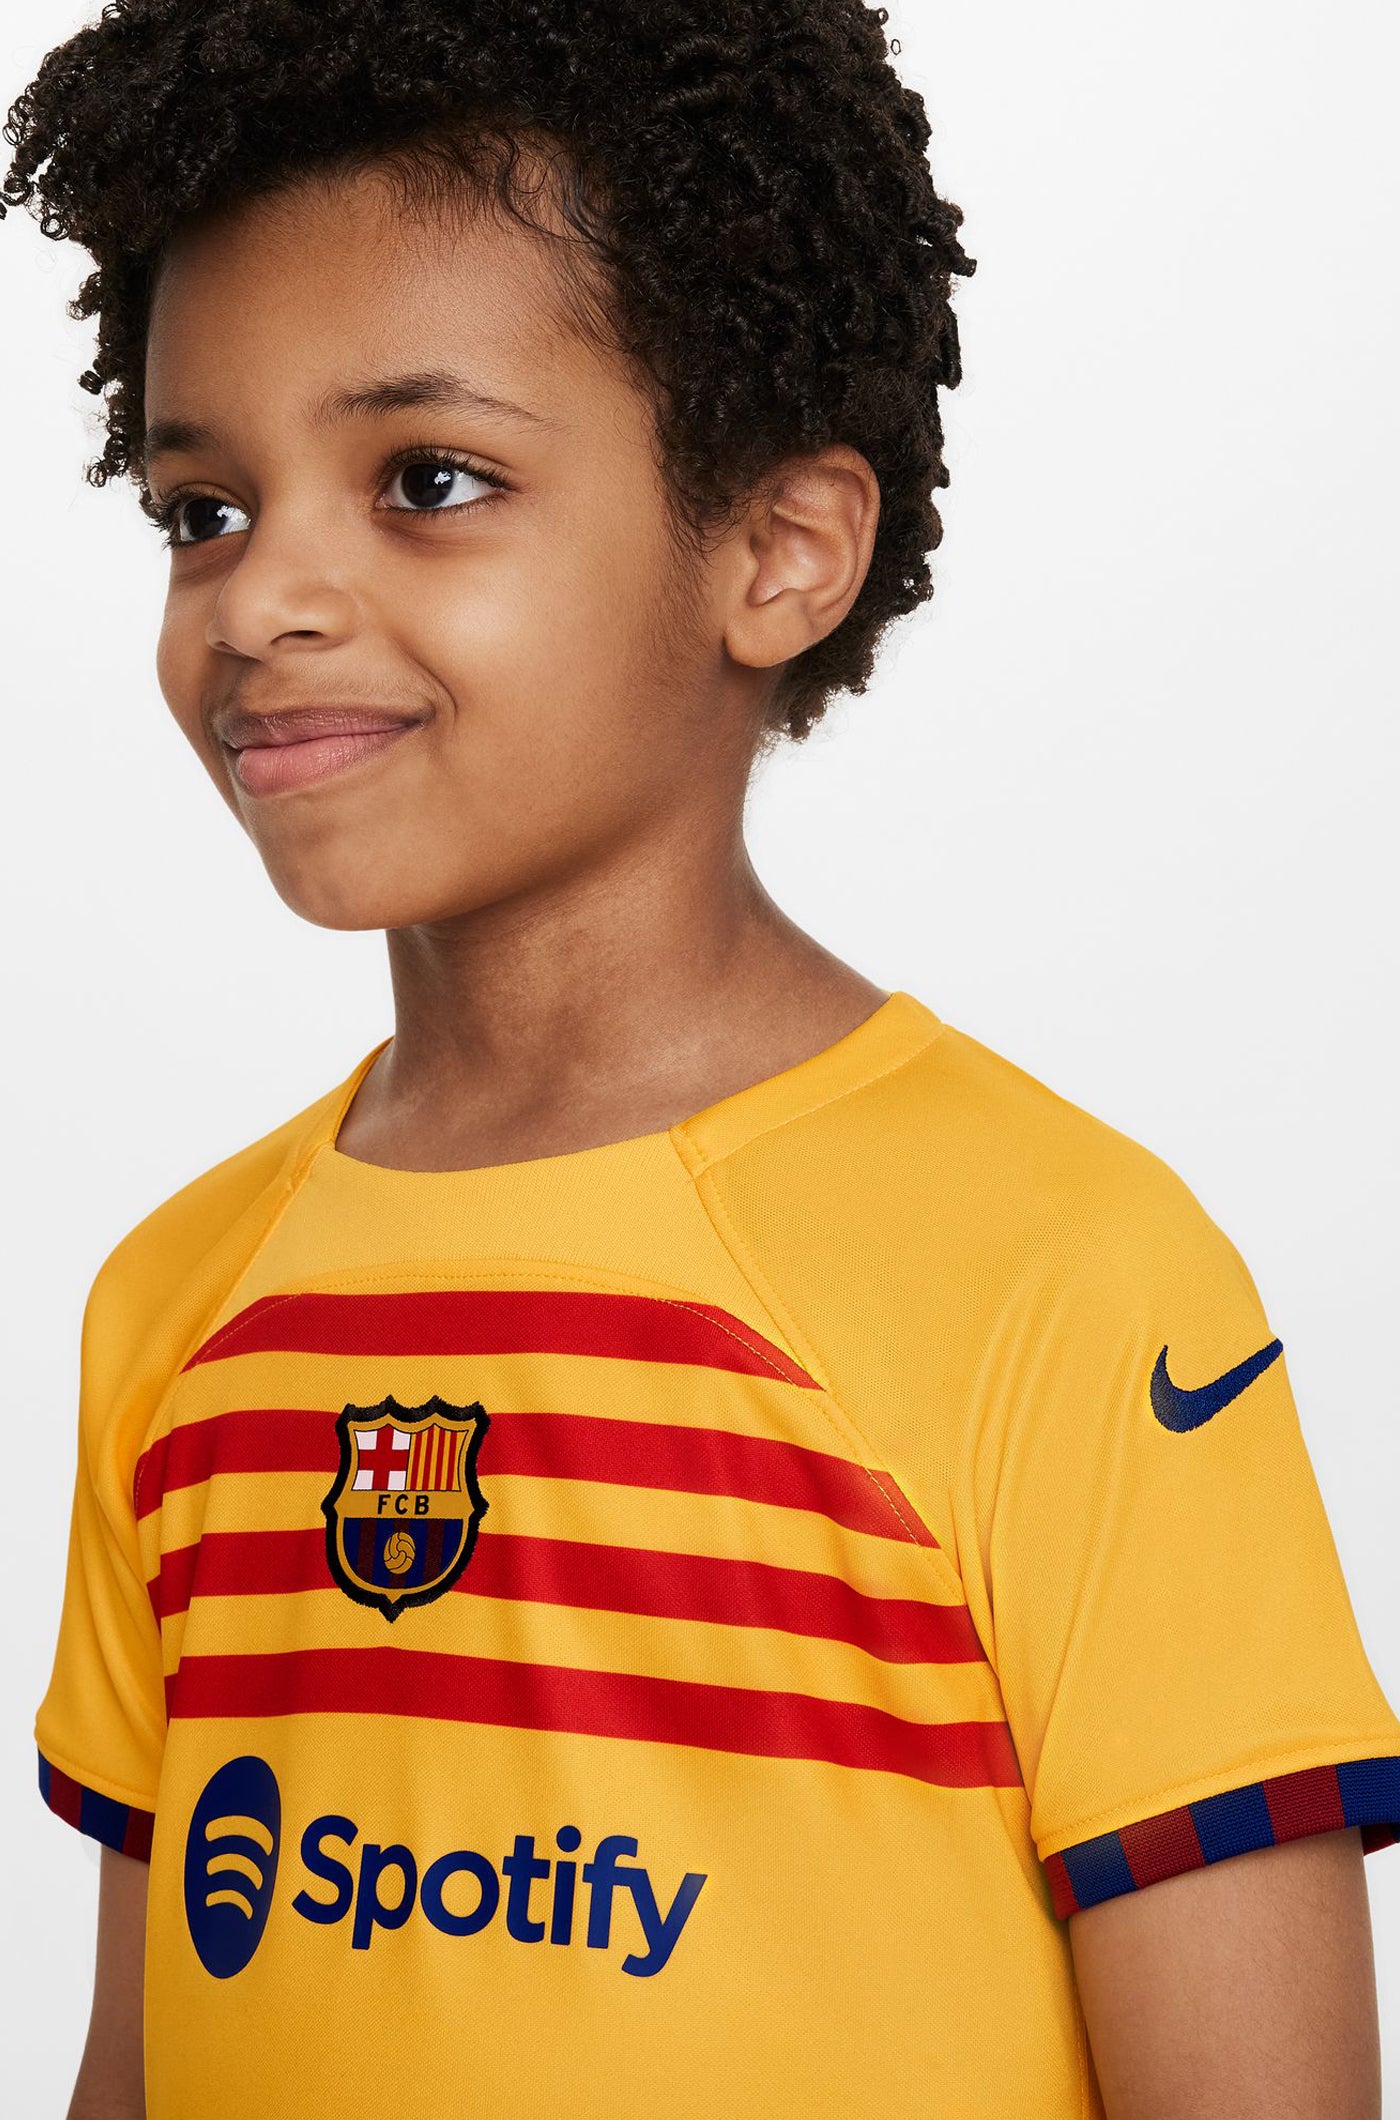 FC Barcelona fourth Kit 23/24 – Younger Kids  - ALEXIA